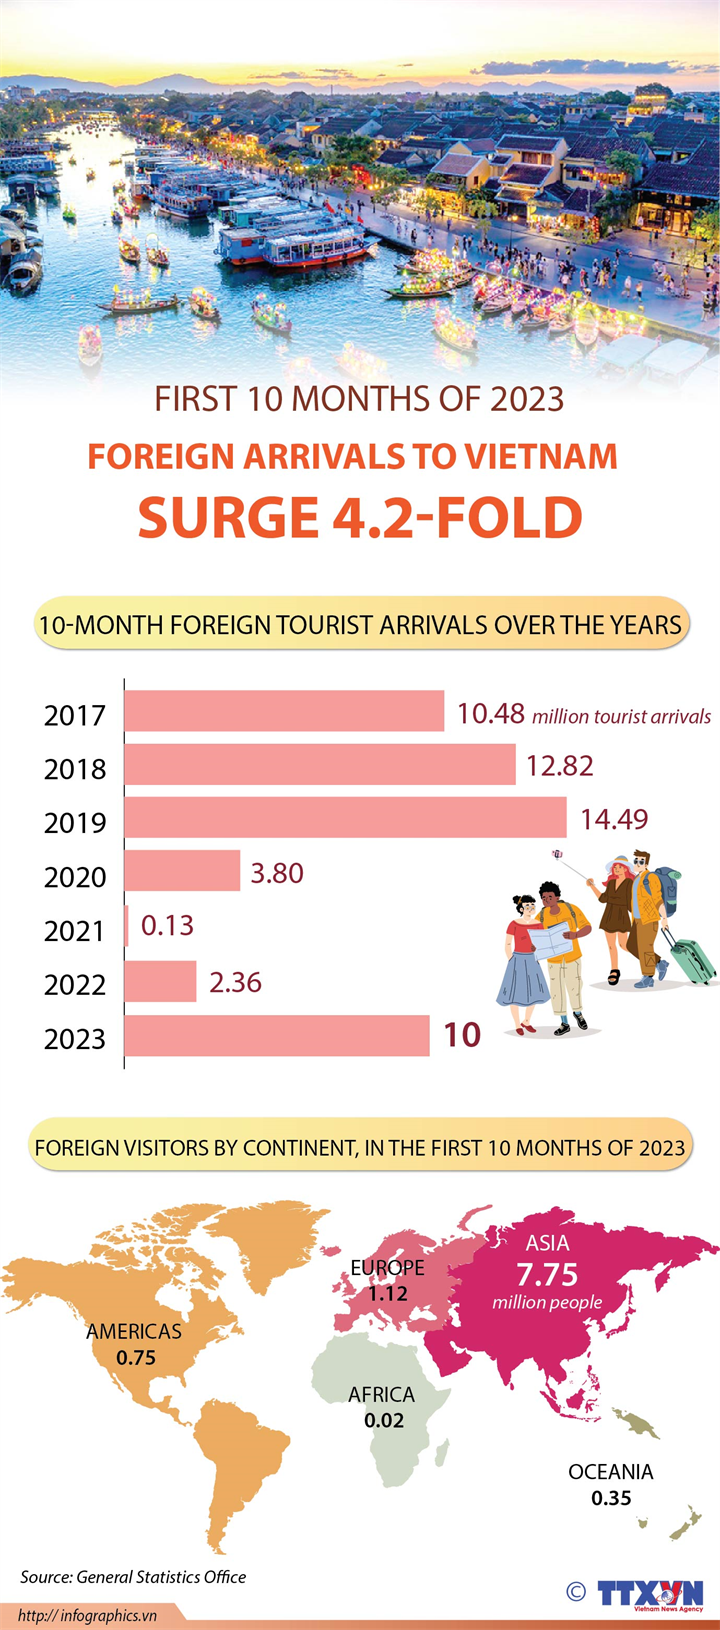 First 10 months of 2023: Foreign arrivals to Vietnam surge 4.2-fold